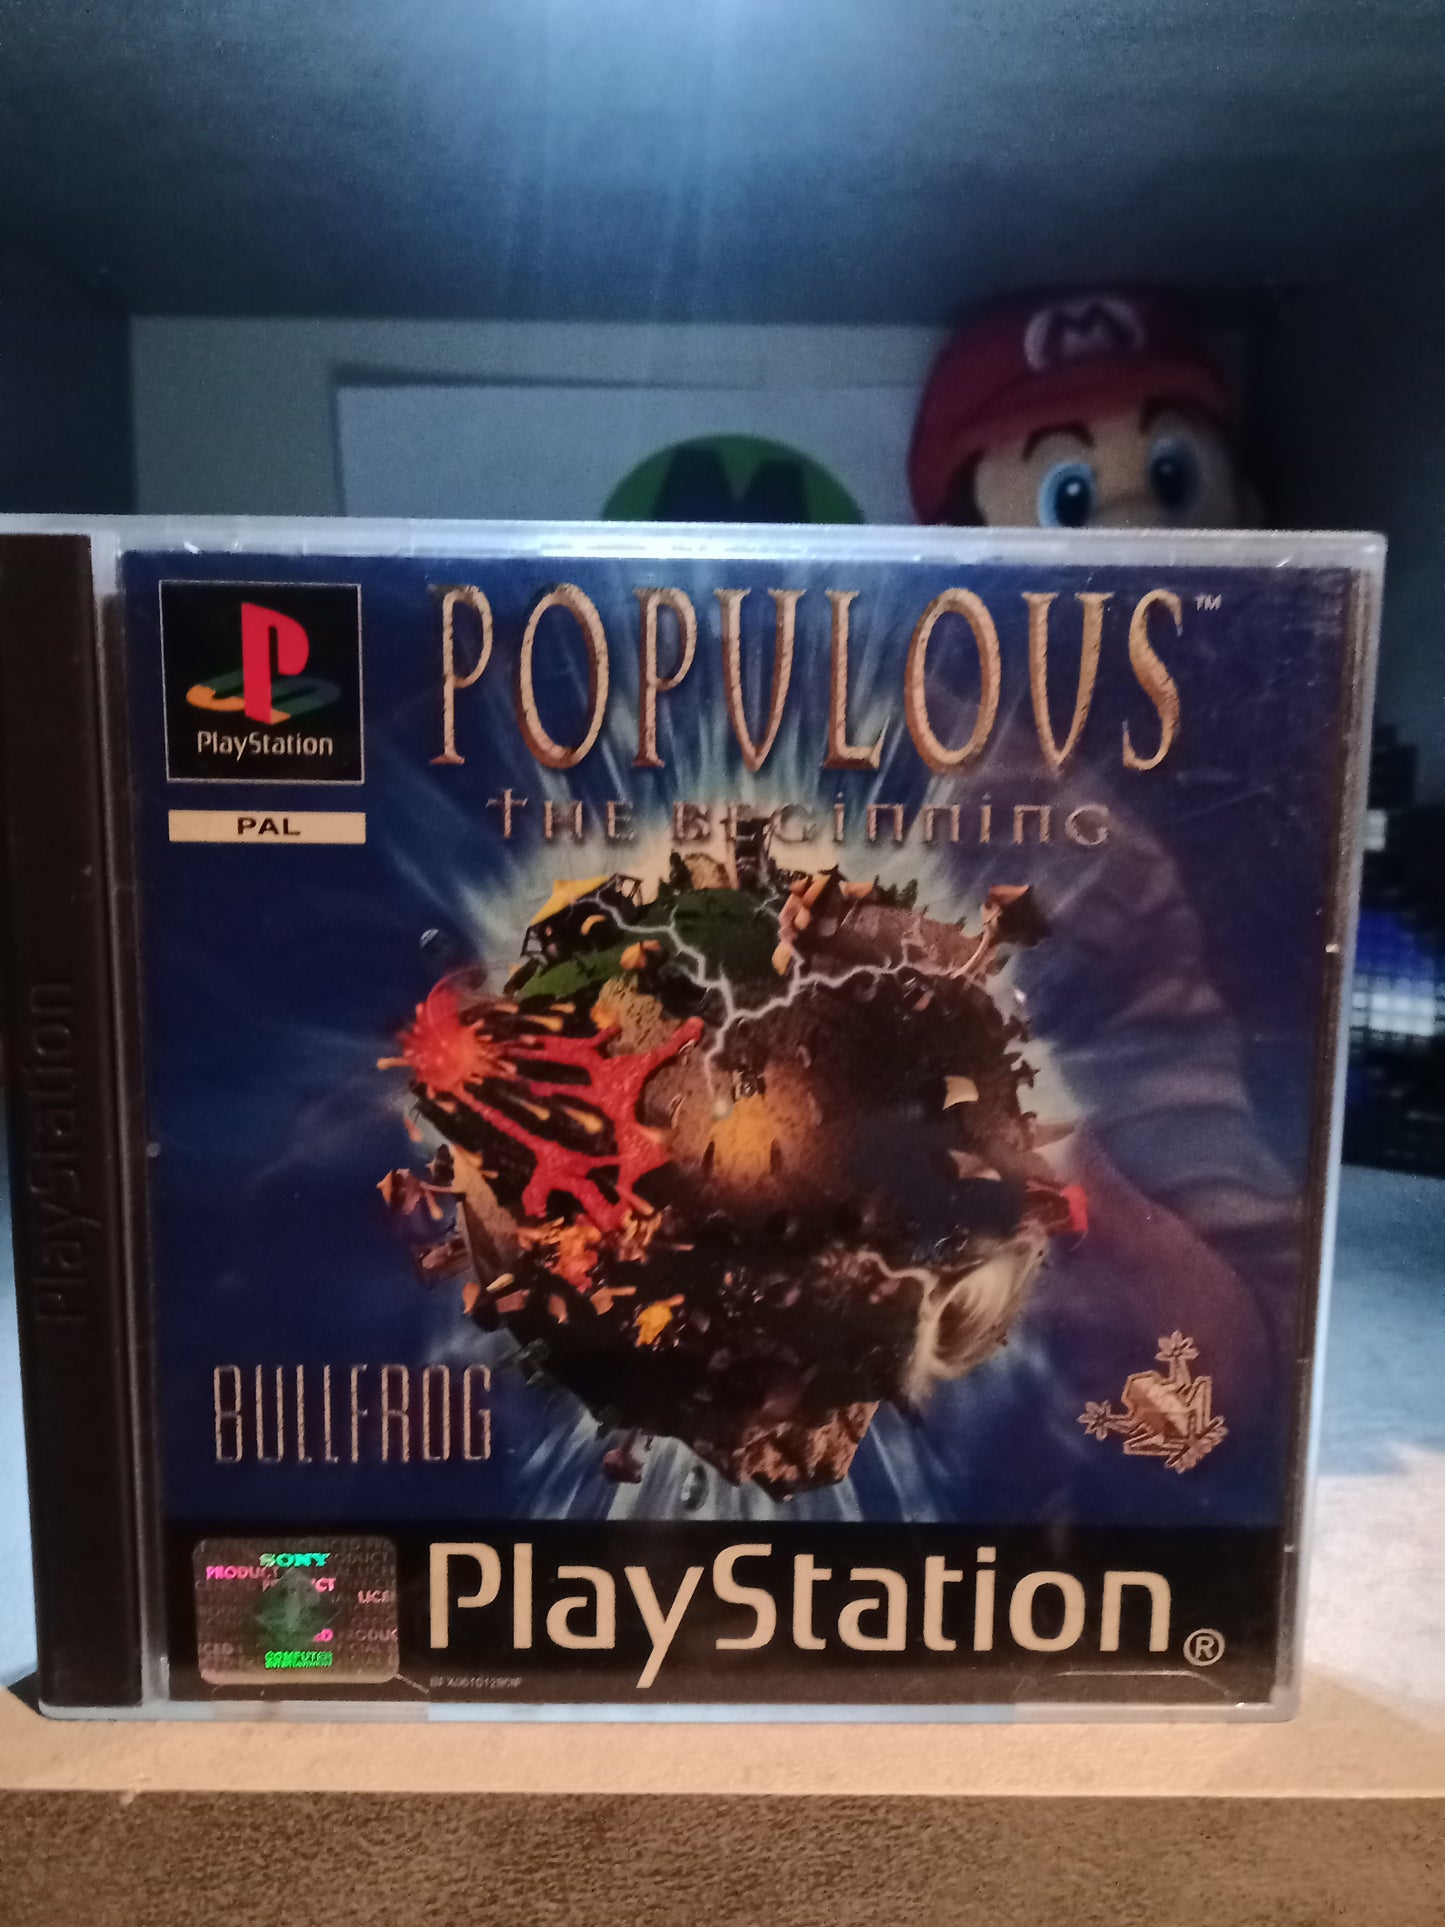 Populous The Beginning